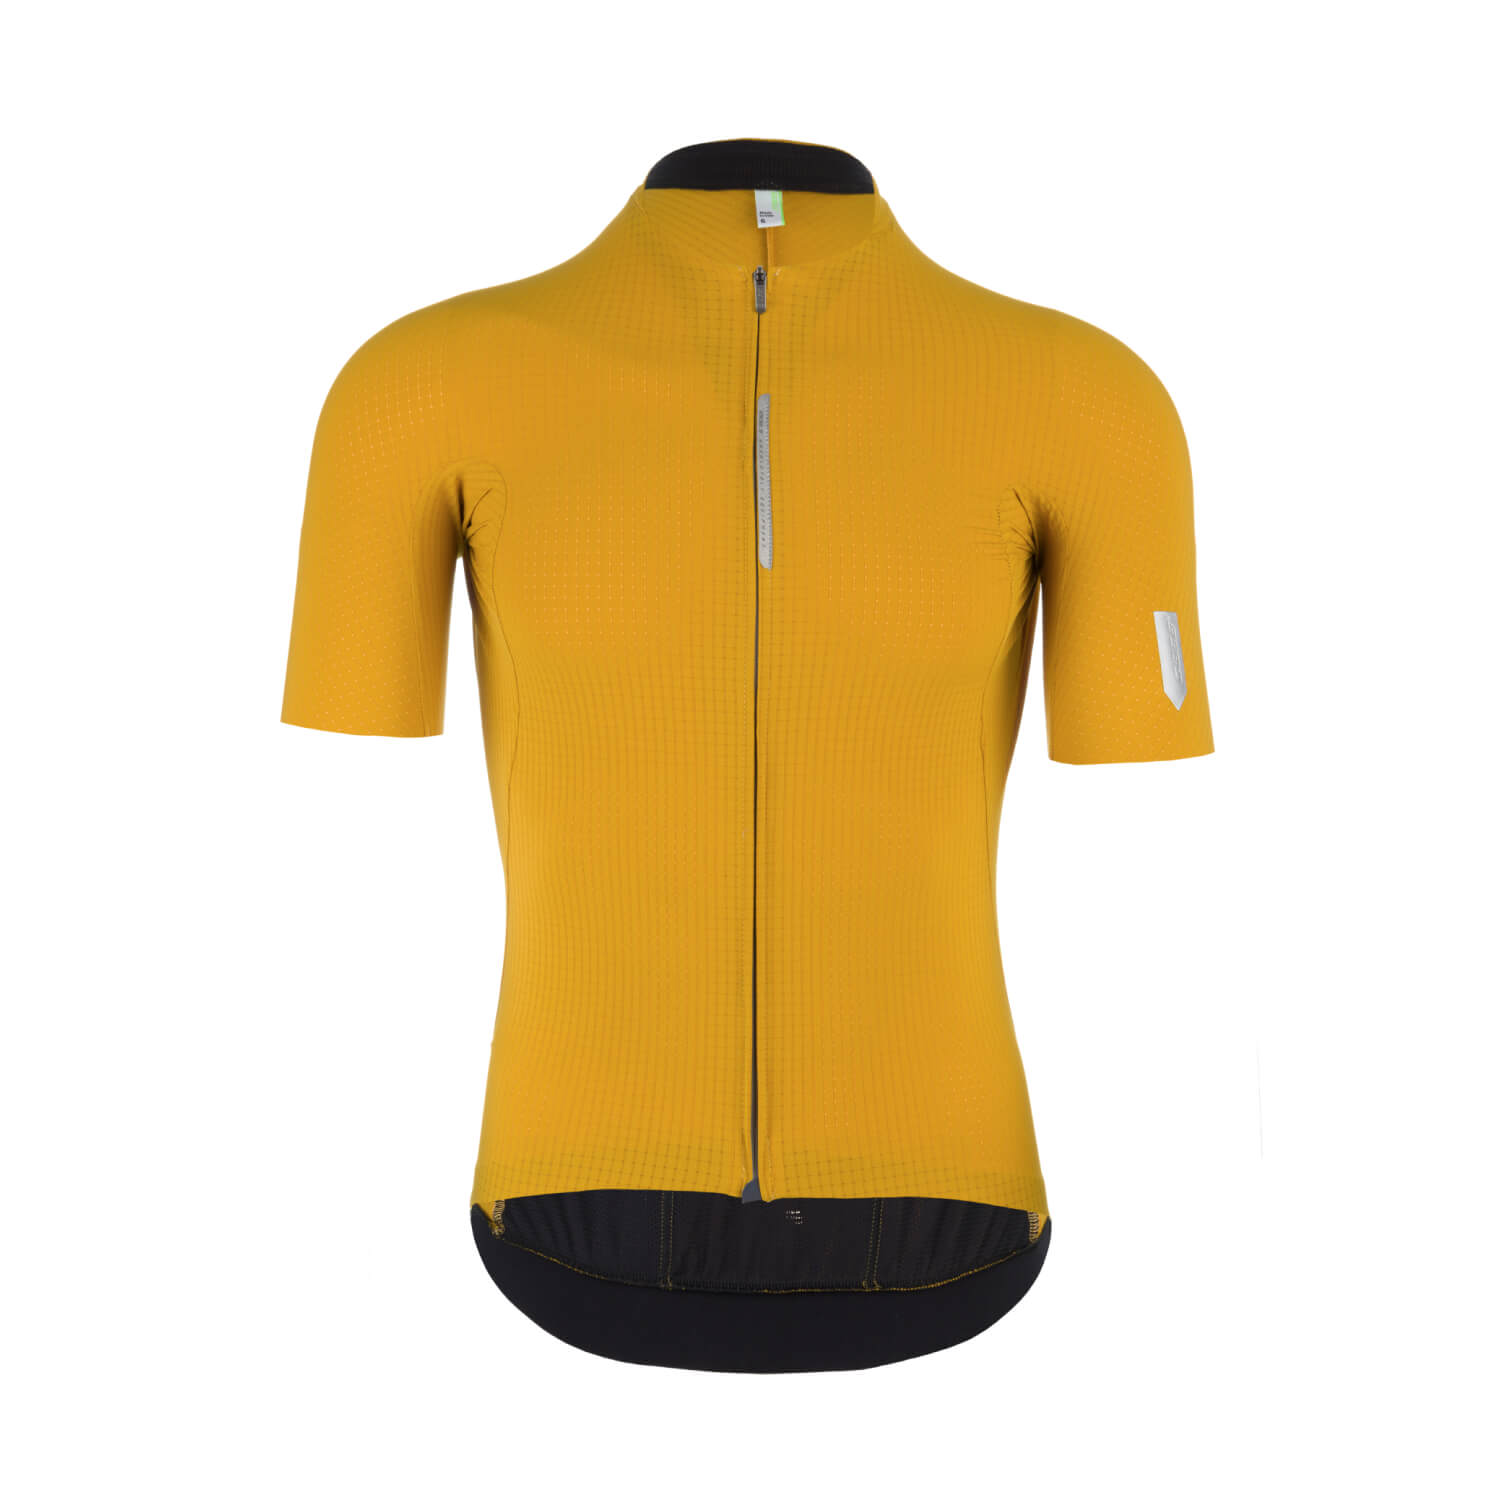 Q36.5 Cycling Clothing, Online at Low Prices